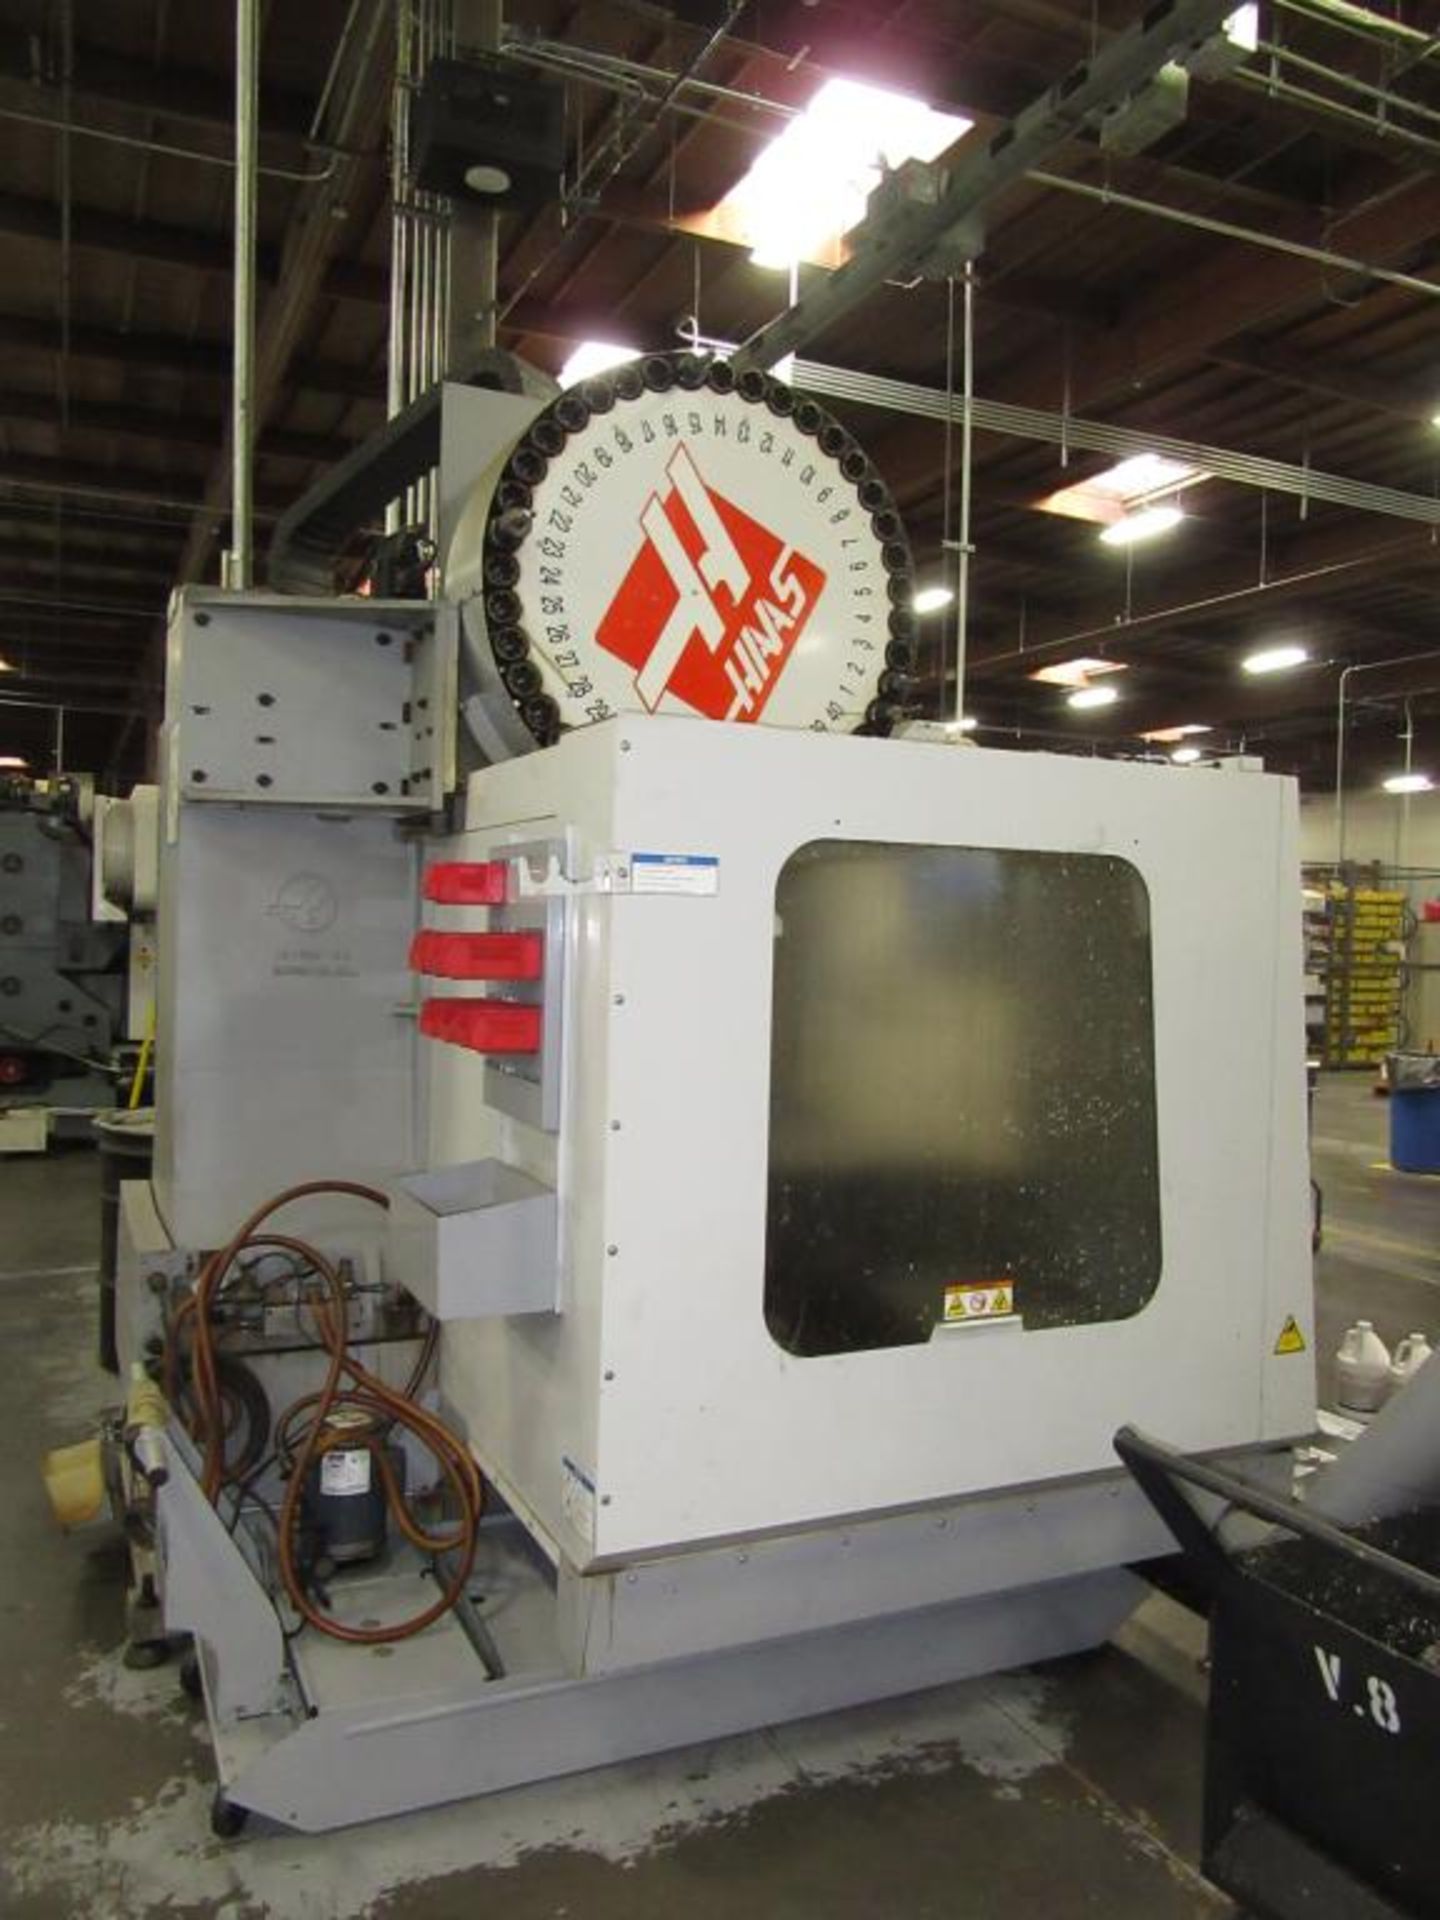 Haas VF-3BYT. 2008 - CNC Vertical Machining Center with Haas 3-Axis Control Panel, Table Size 54"L x - Image 9 of 15